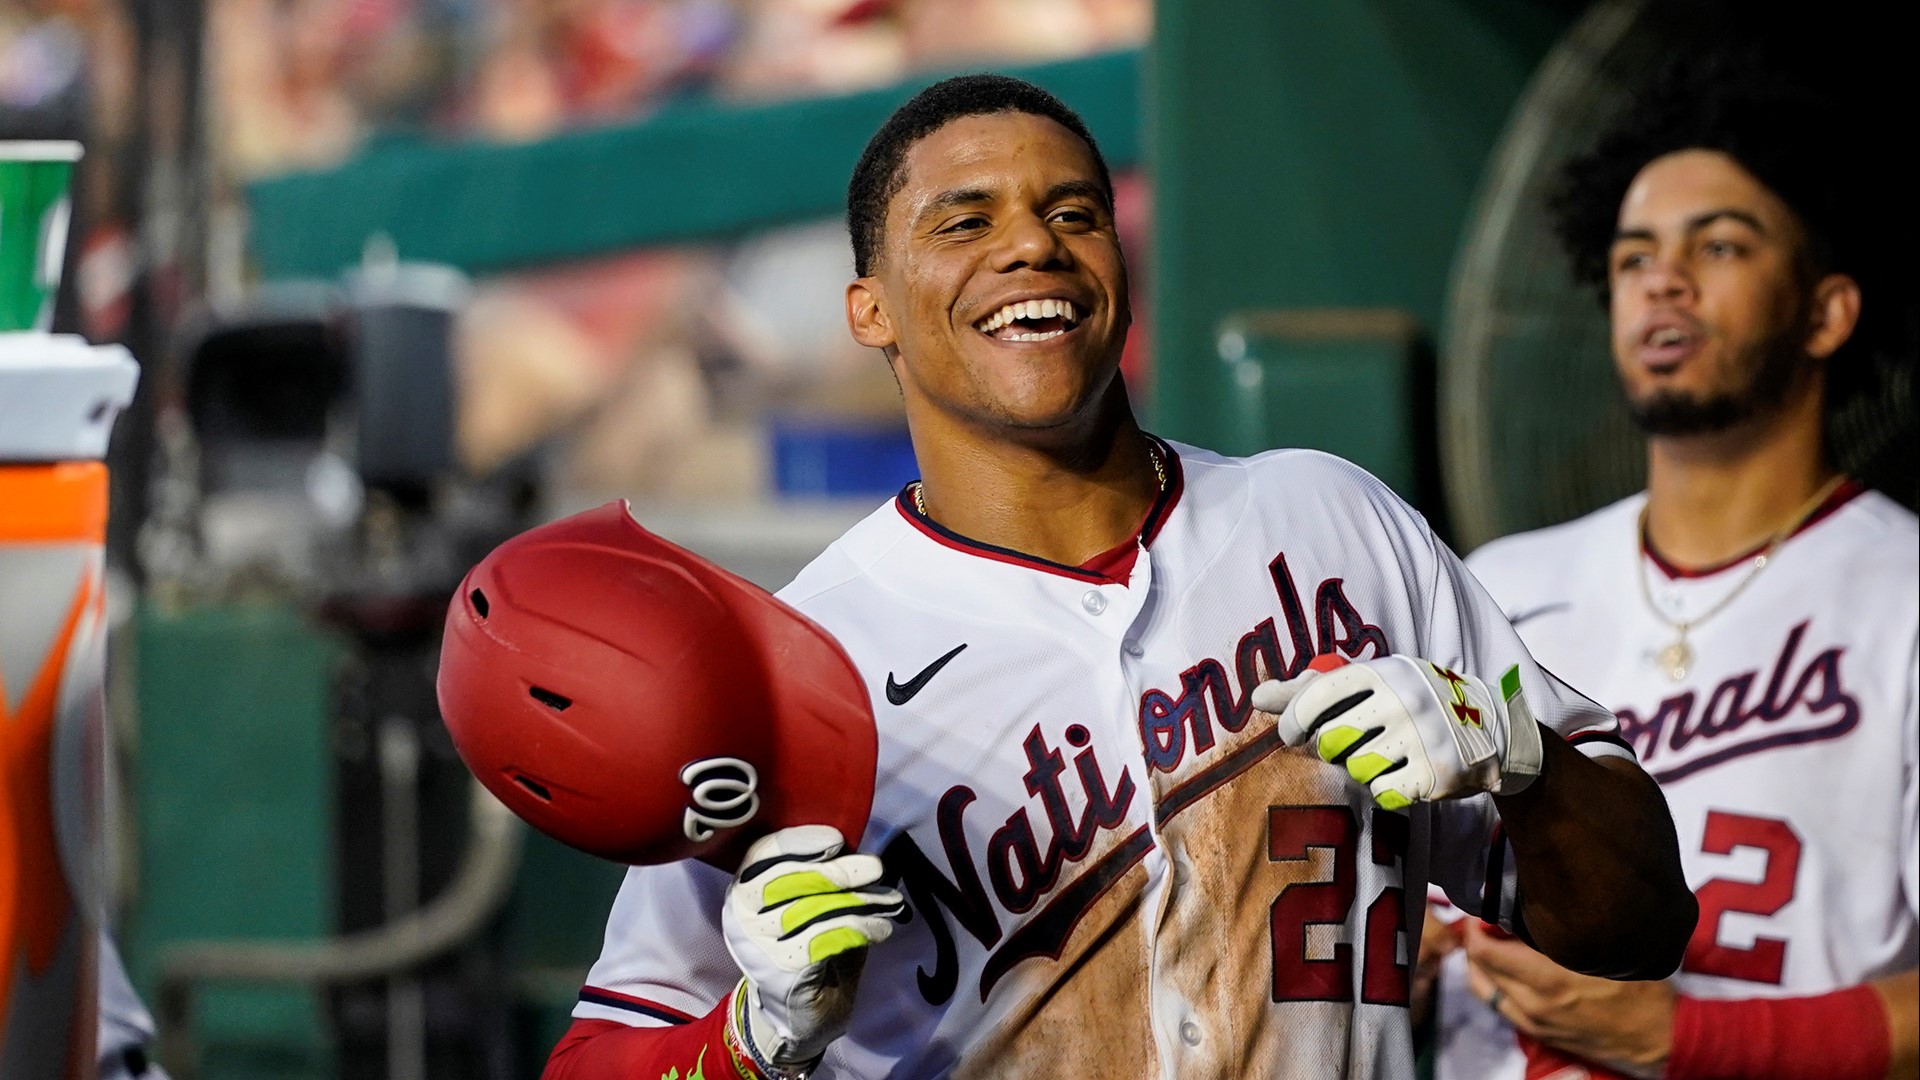 After Juan Soto was traded from the Nationals to the Padres, it begins a particularly dark time in D.C. sports history.